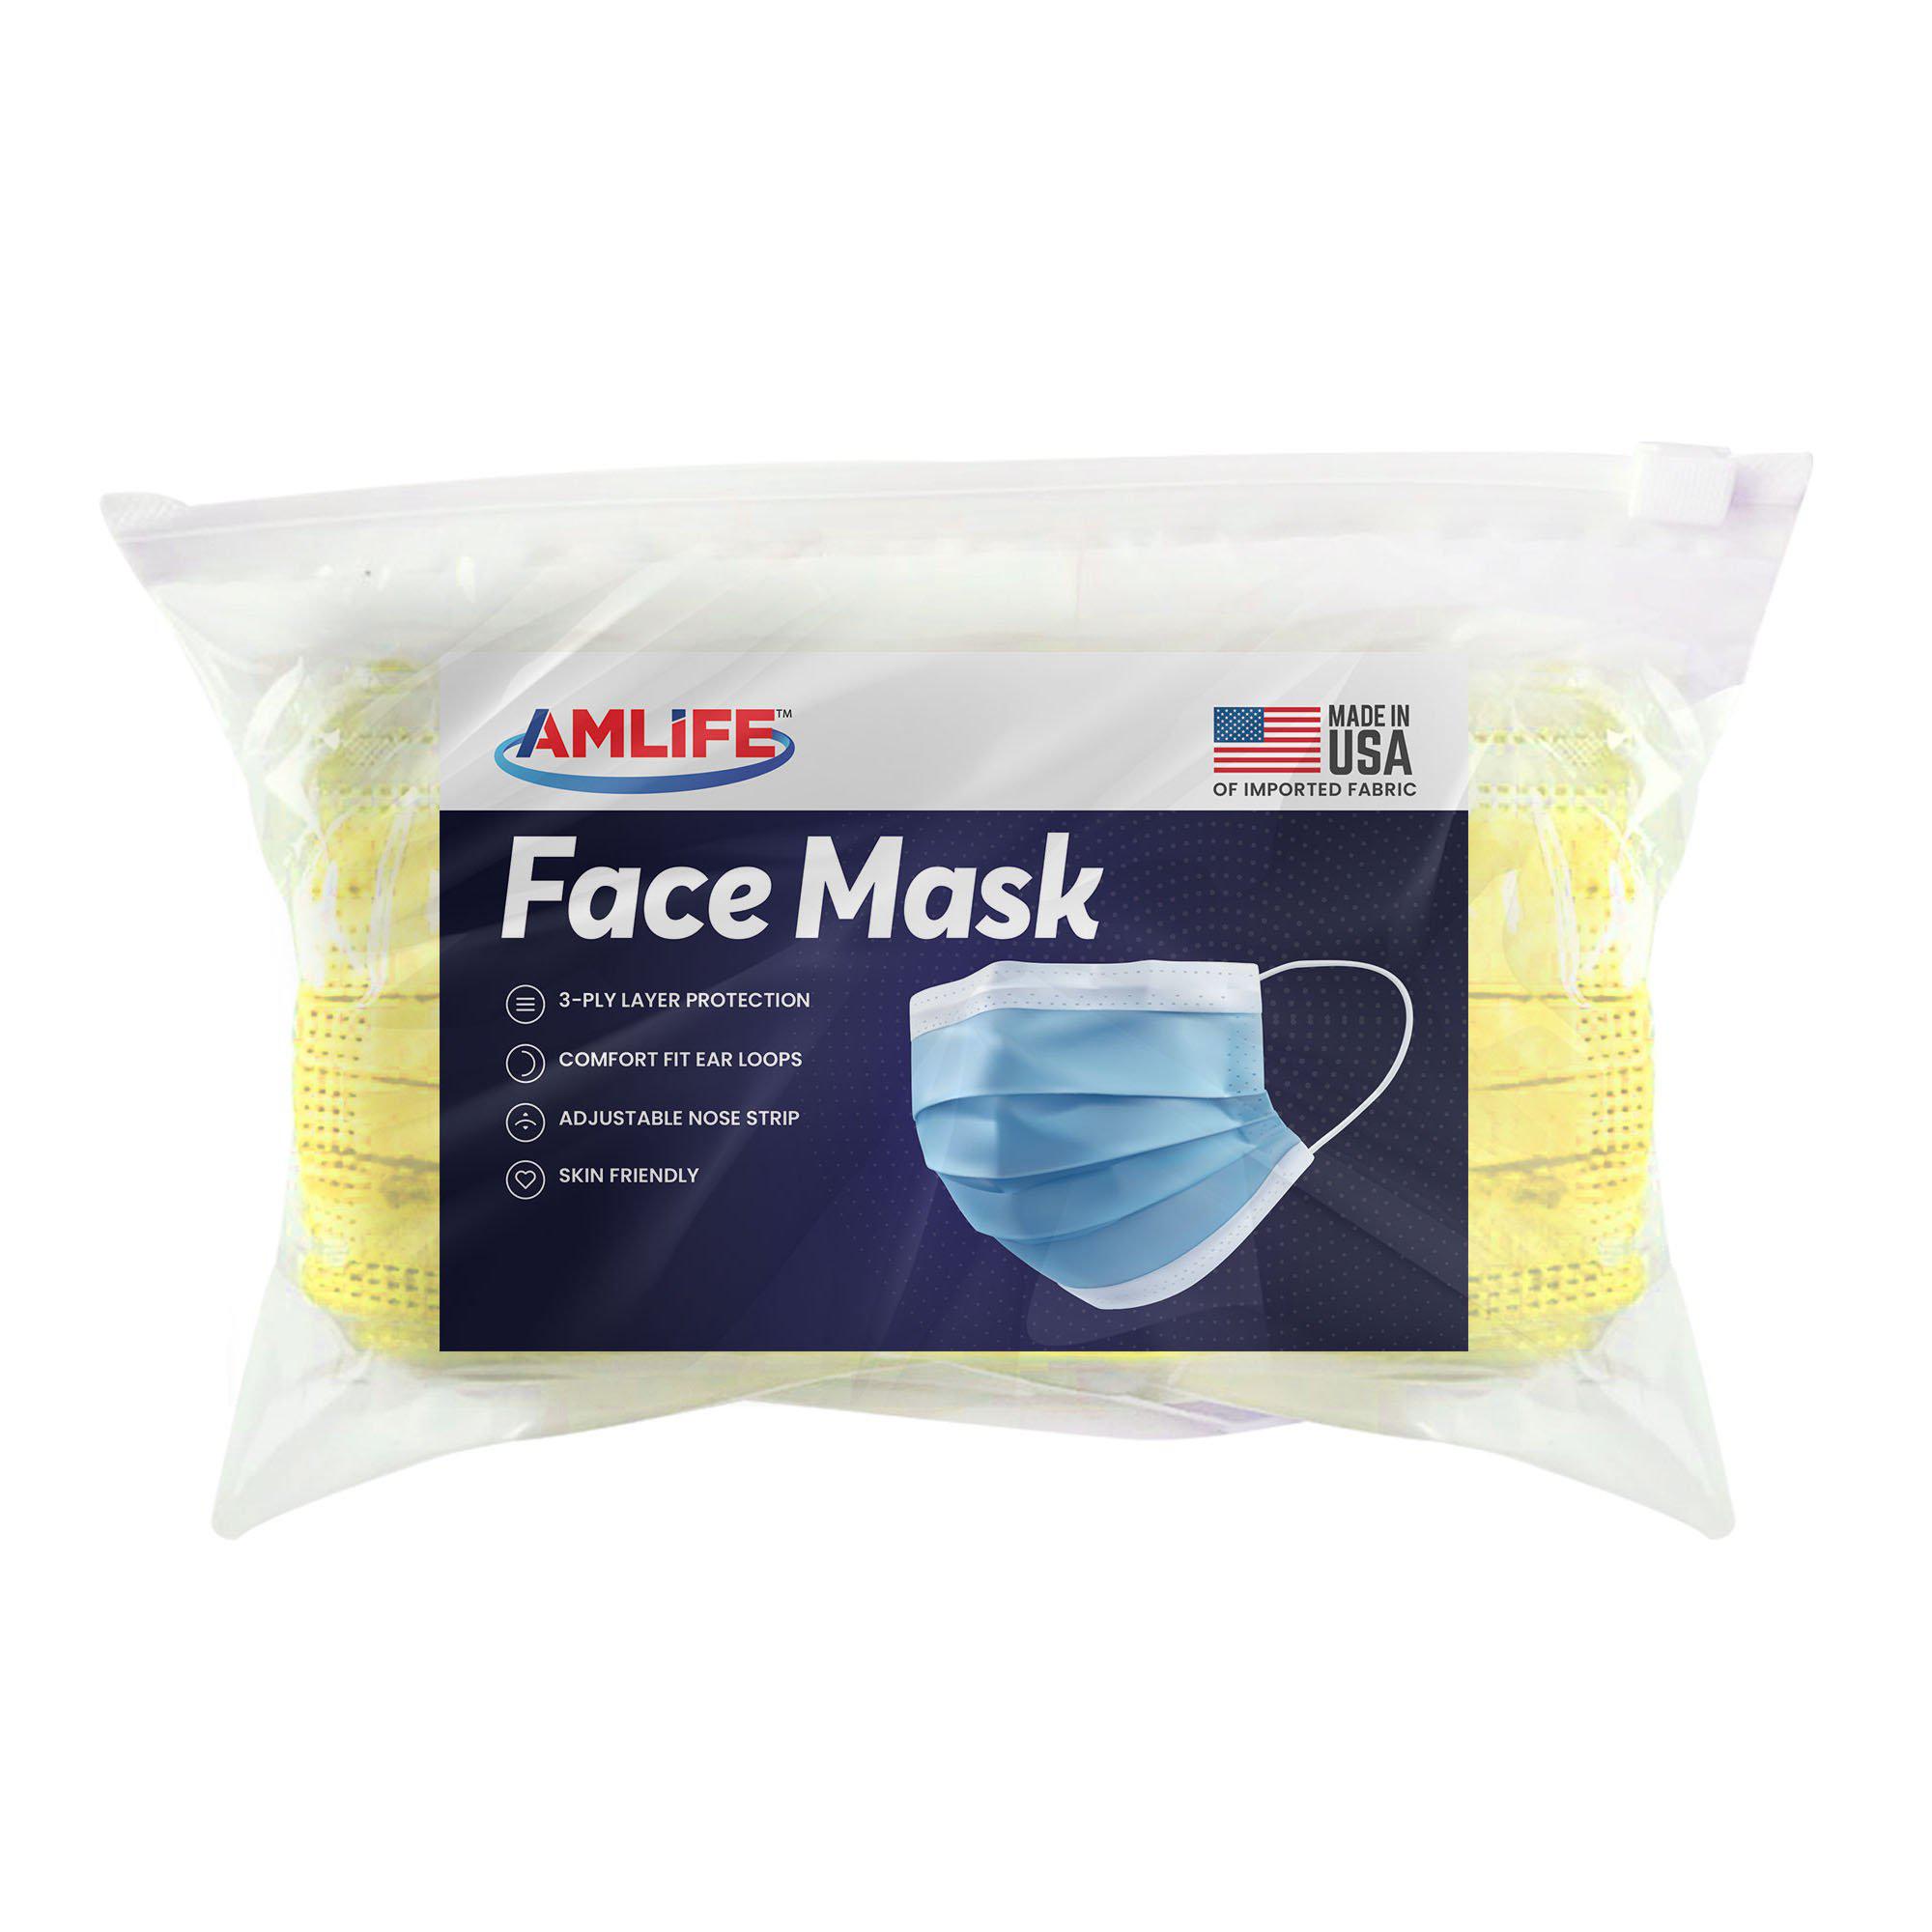 Amlife Face Mask Packs Disposable 3-Ply Filter - Made in USA with Imported Fabric - Yellow